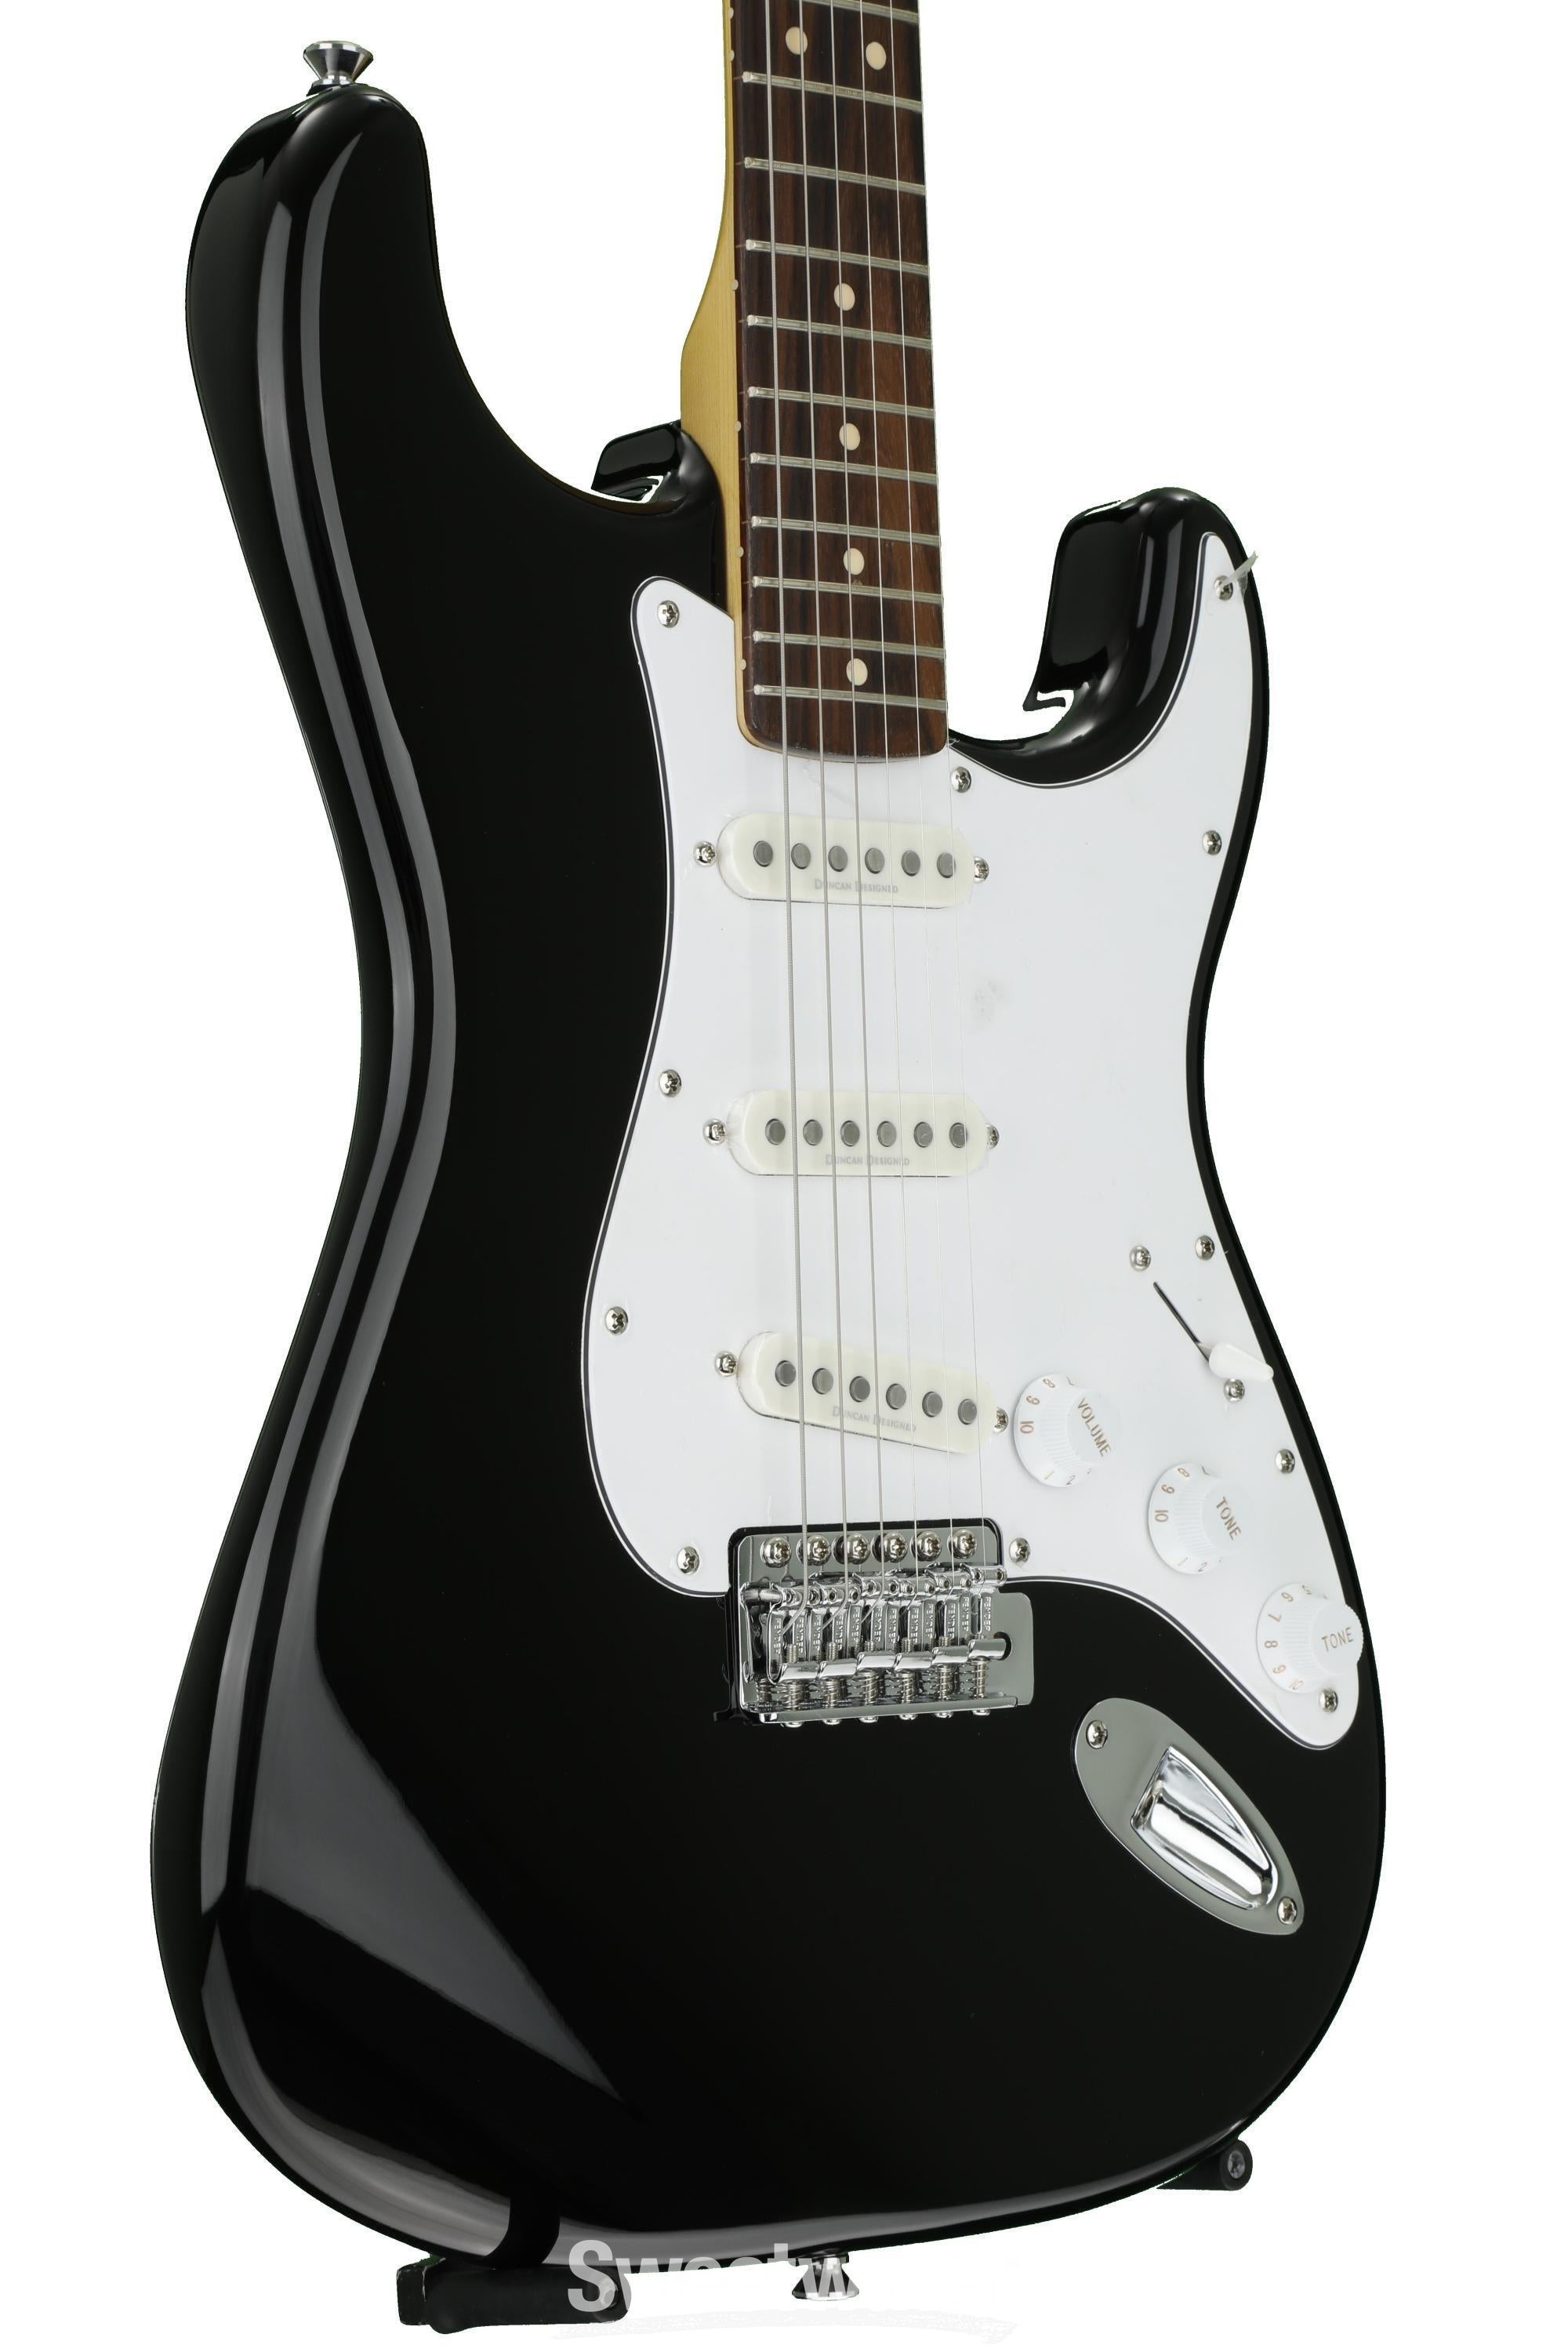 Squier Vintage Modified Stratocaster - Black | Sweetwater